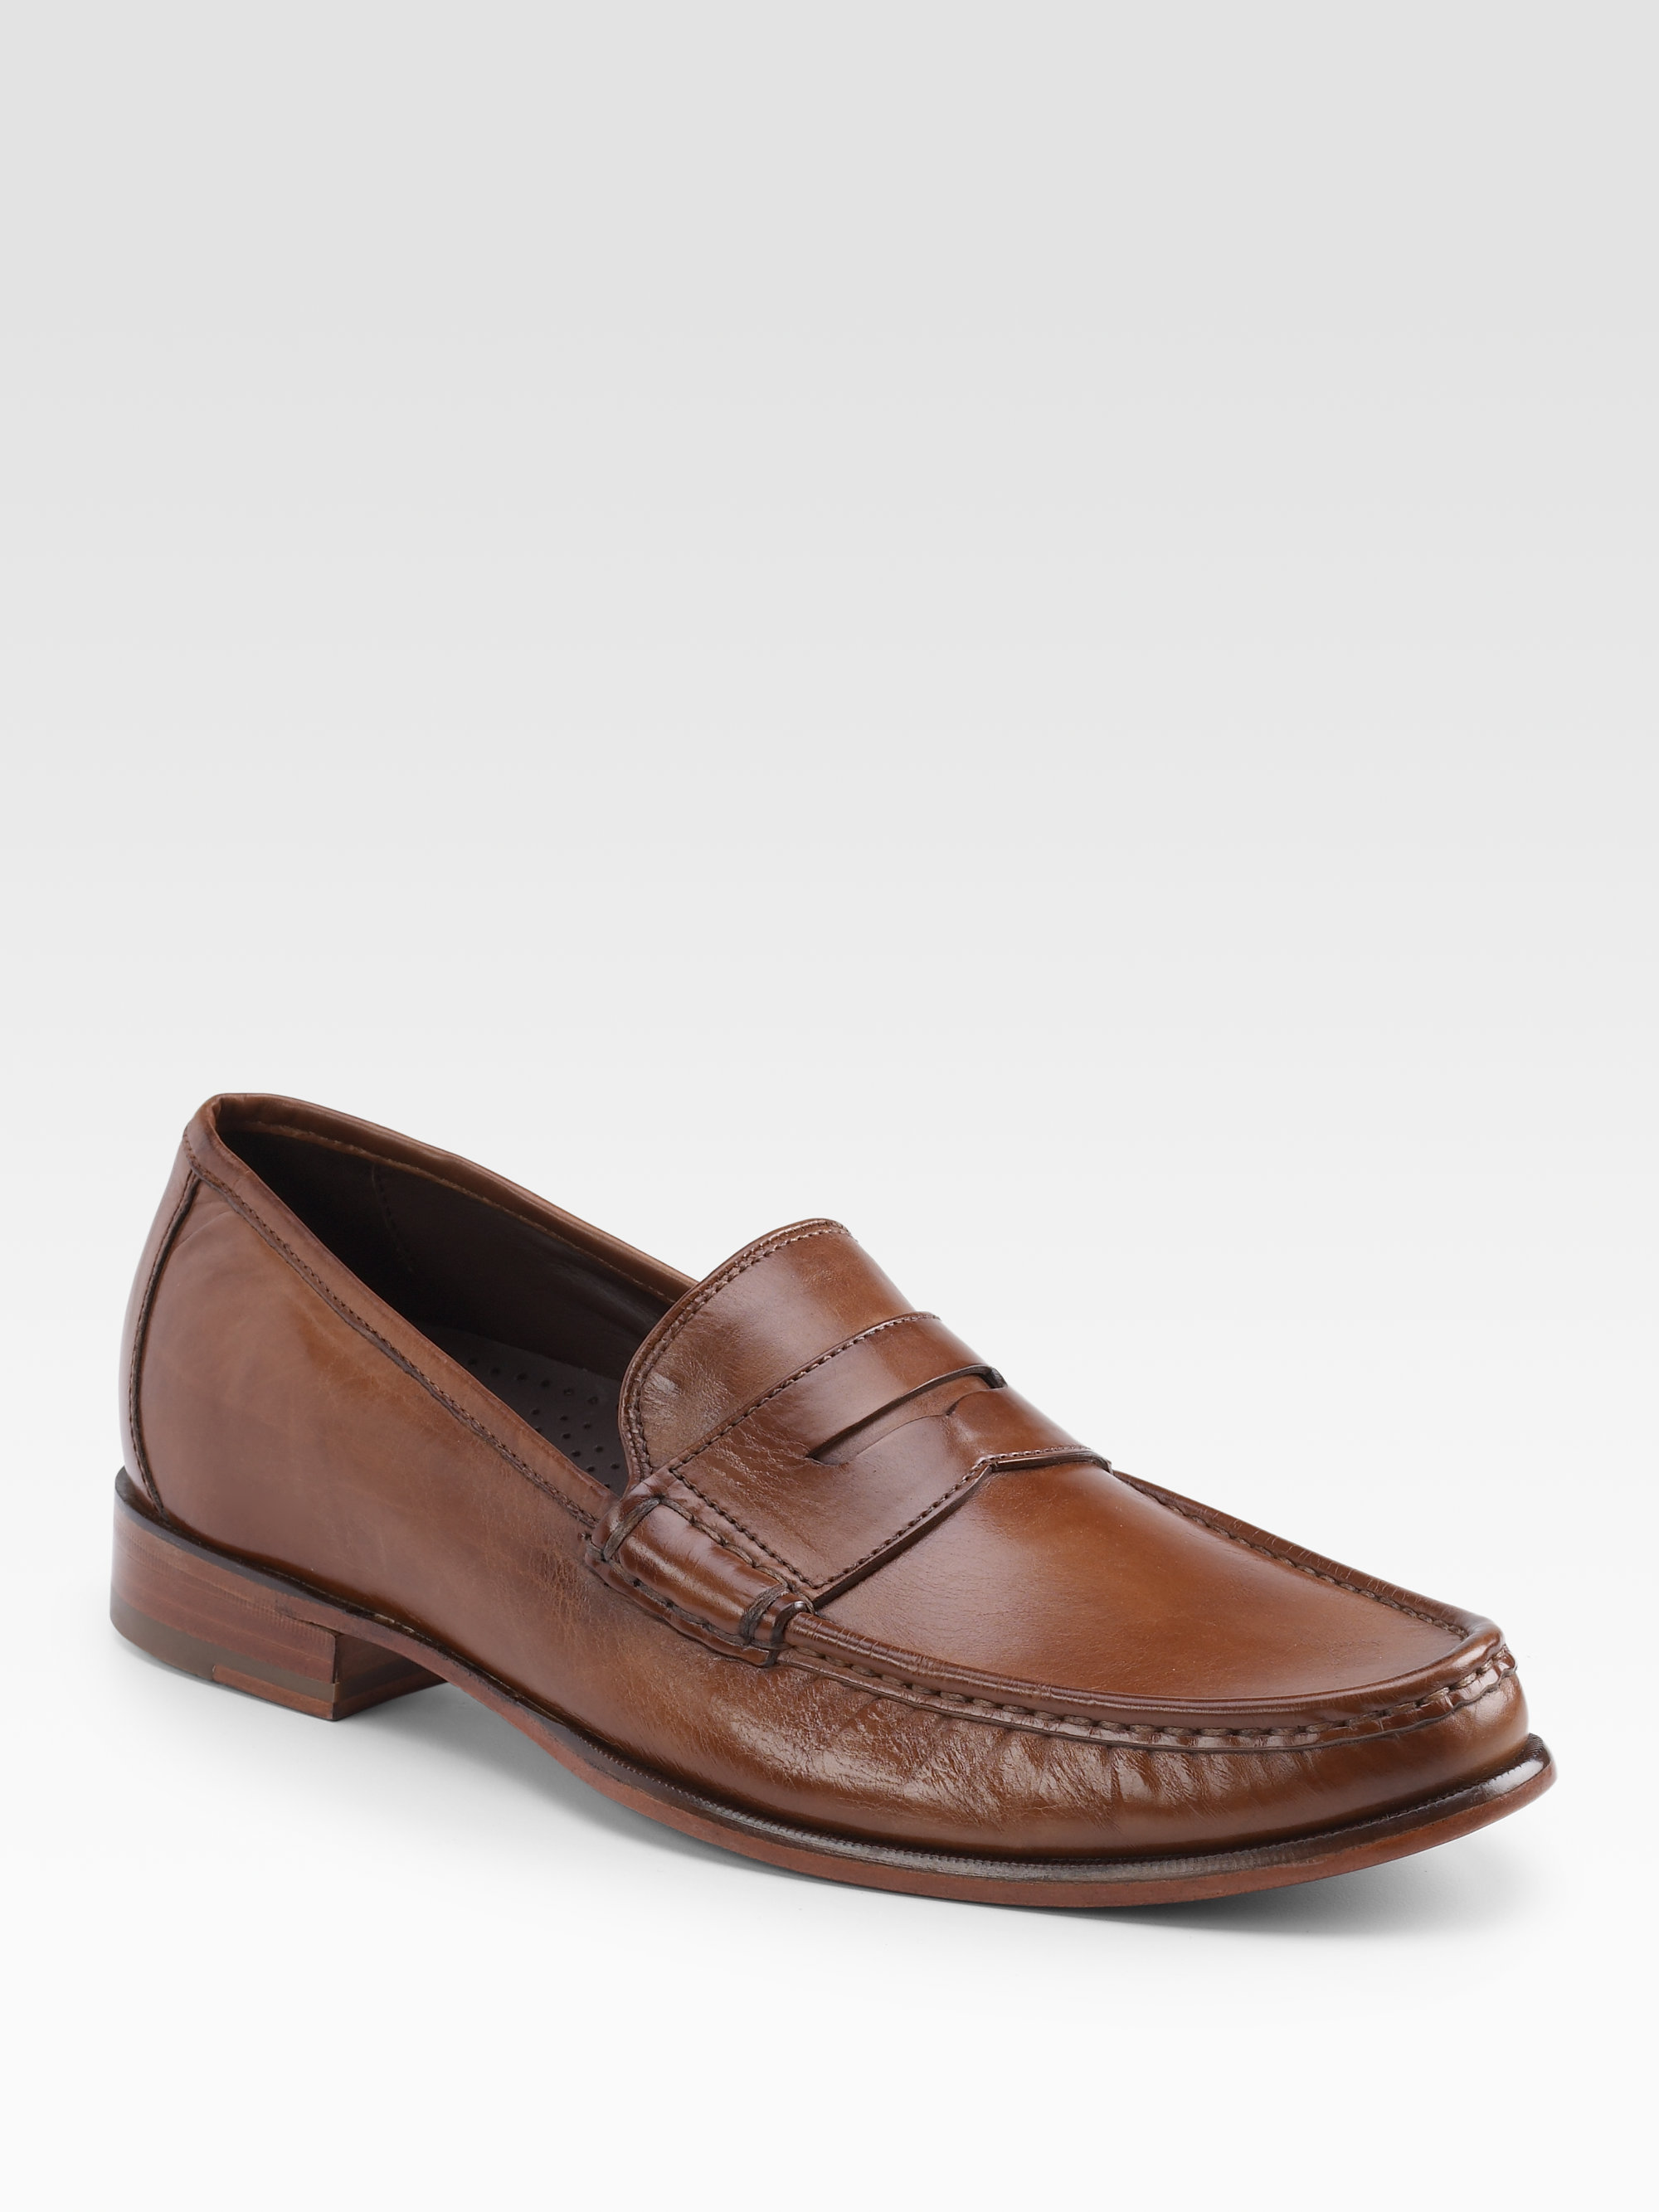 Air Aiden Penny Loafers in British Tan 